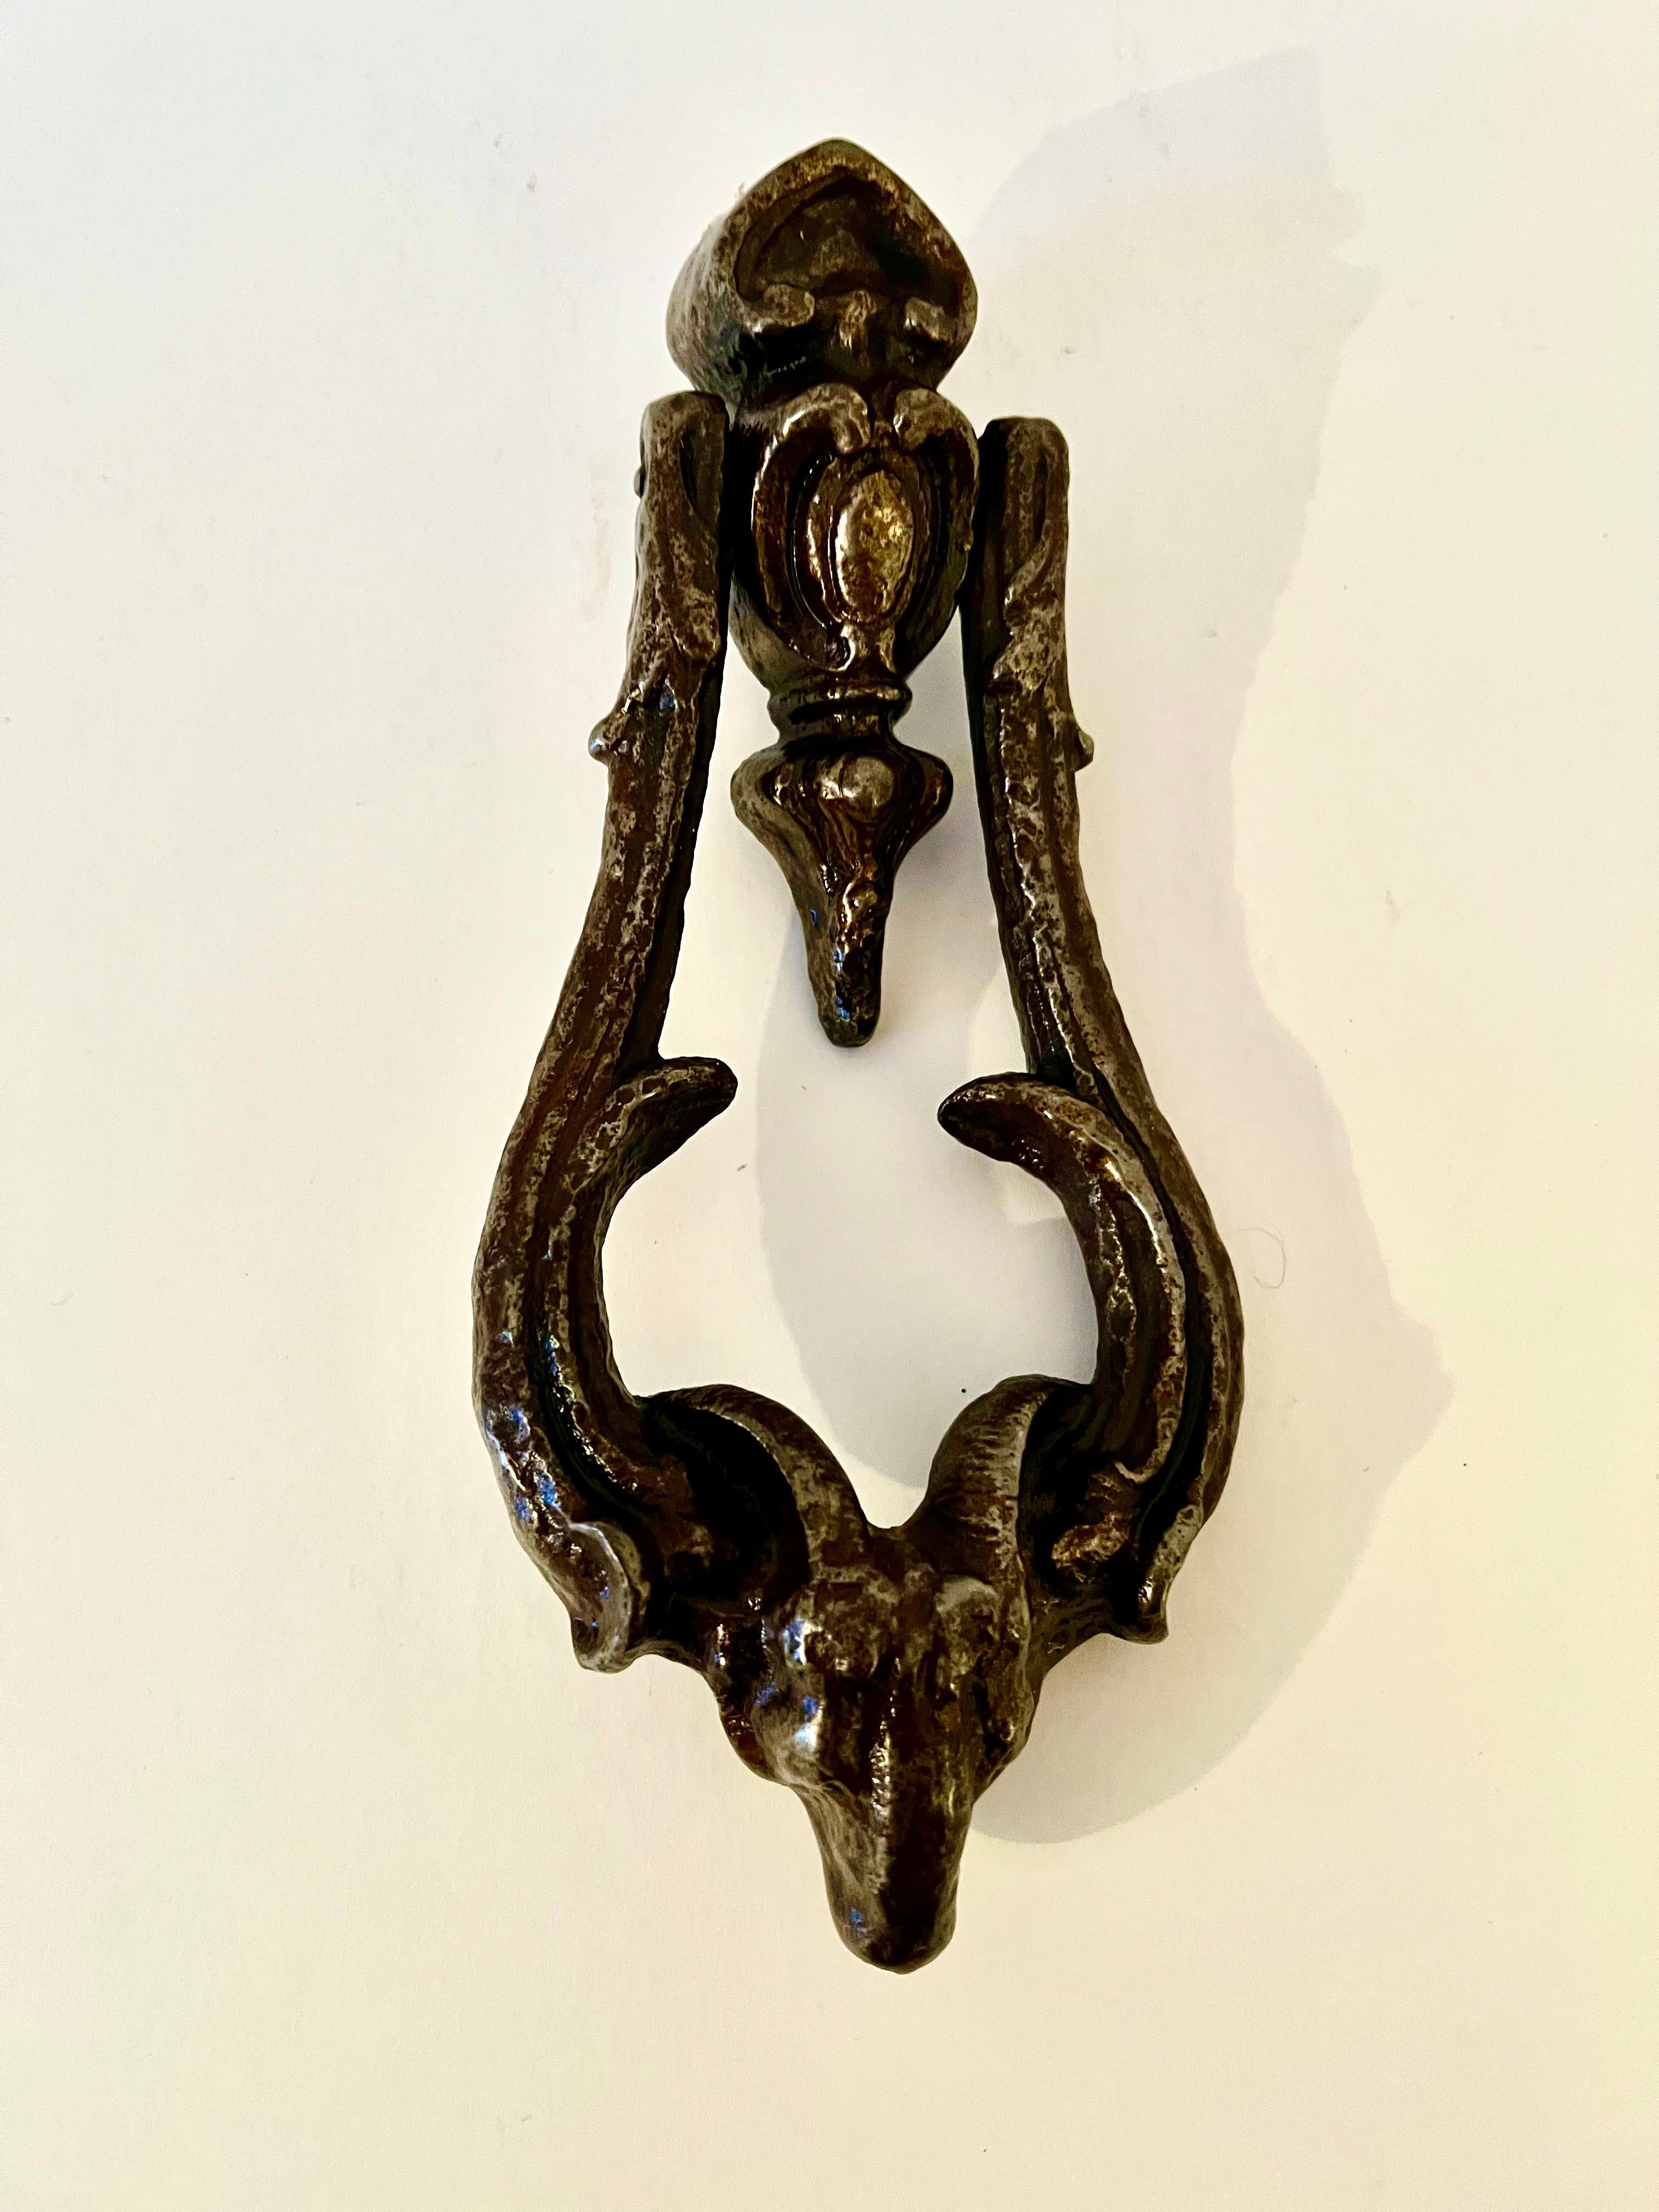 A heavy and substantial door knocker with a lovely ram detail entertained into the design. A great addition to the look of a new home or one that is keeping with the integrity of a period home or brownstone. We sell a lot of door knockers and this